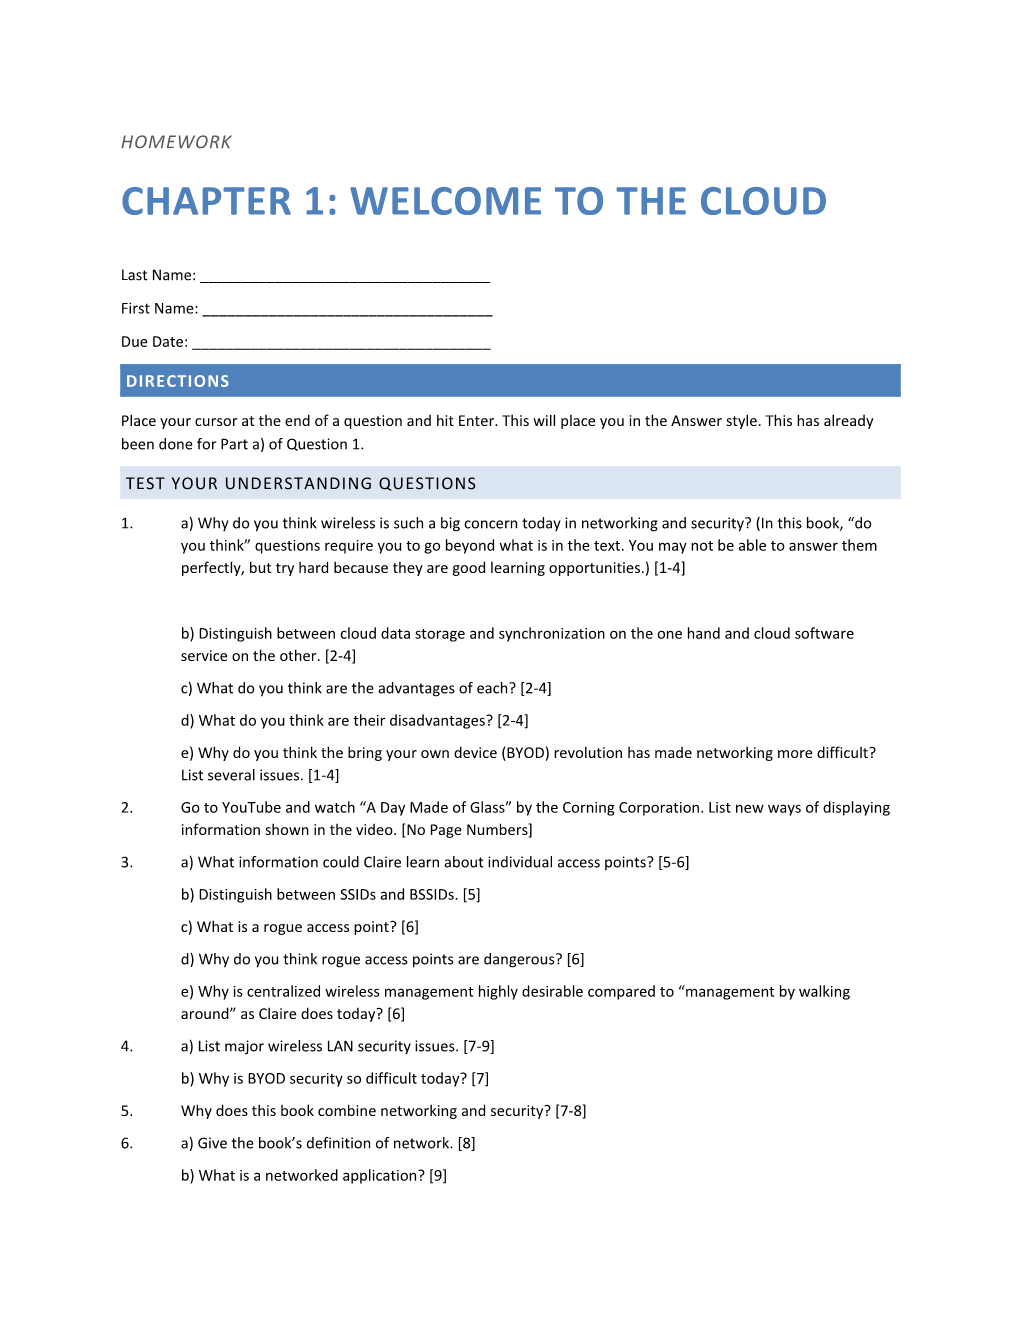 Chapter 1: Welcome to the Cloud